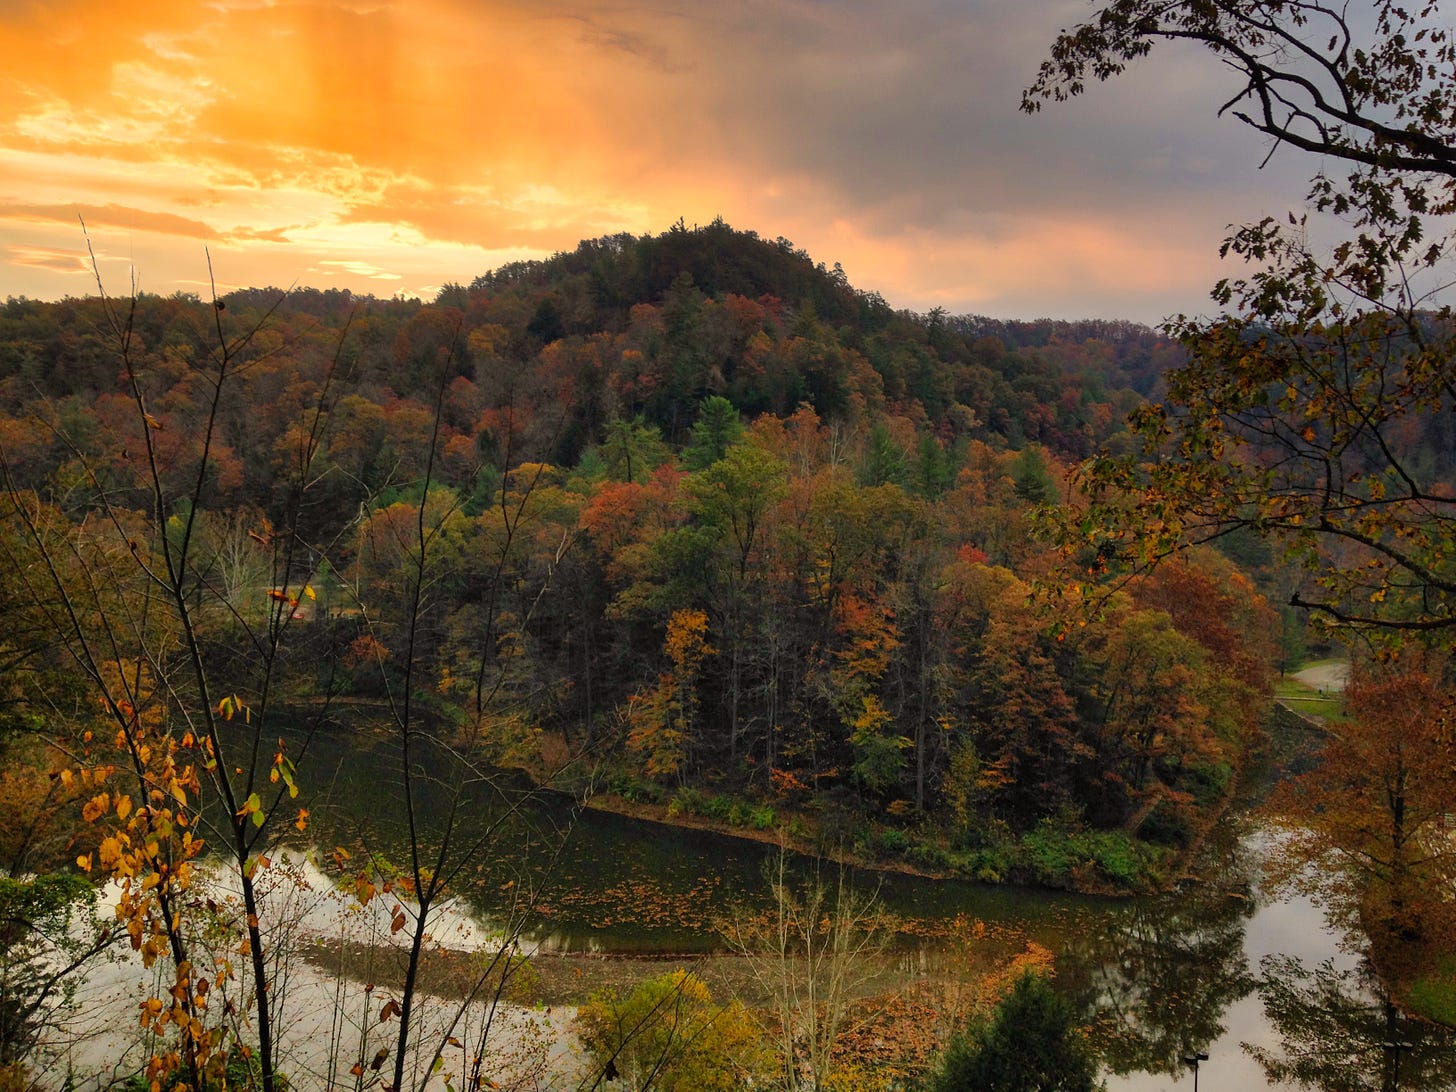 The orange, red, brown, and green of the forest trees overlooking a small mountain lake with the setting sun on the left